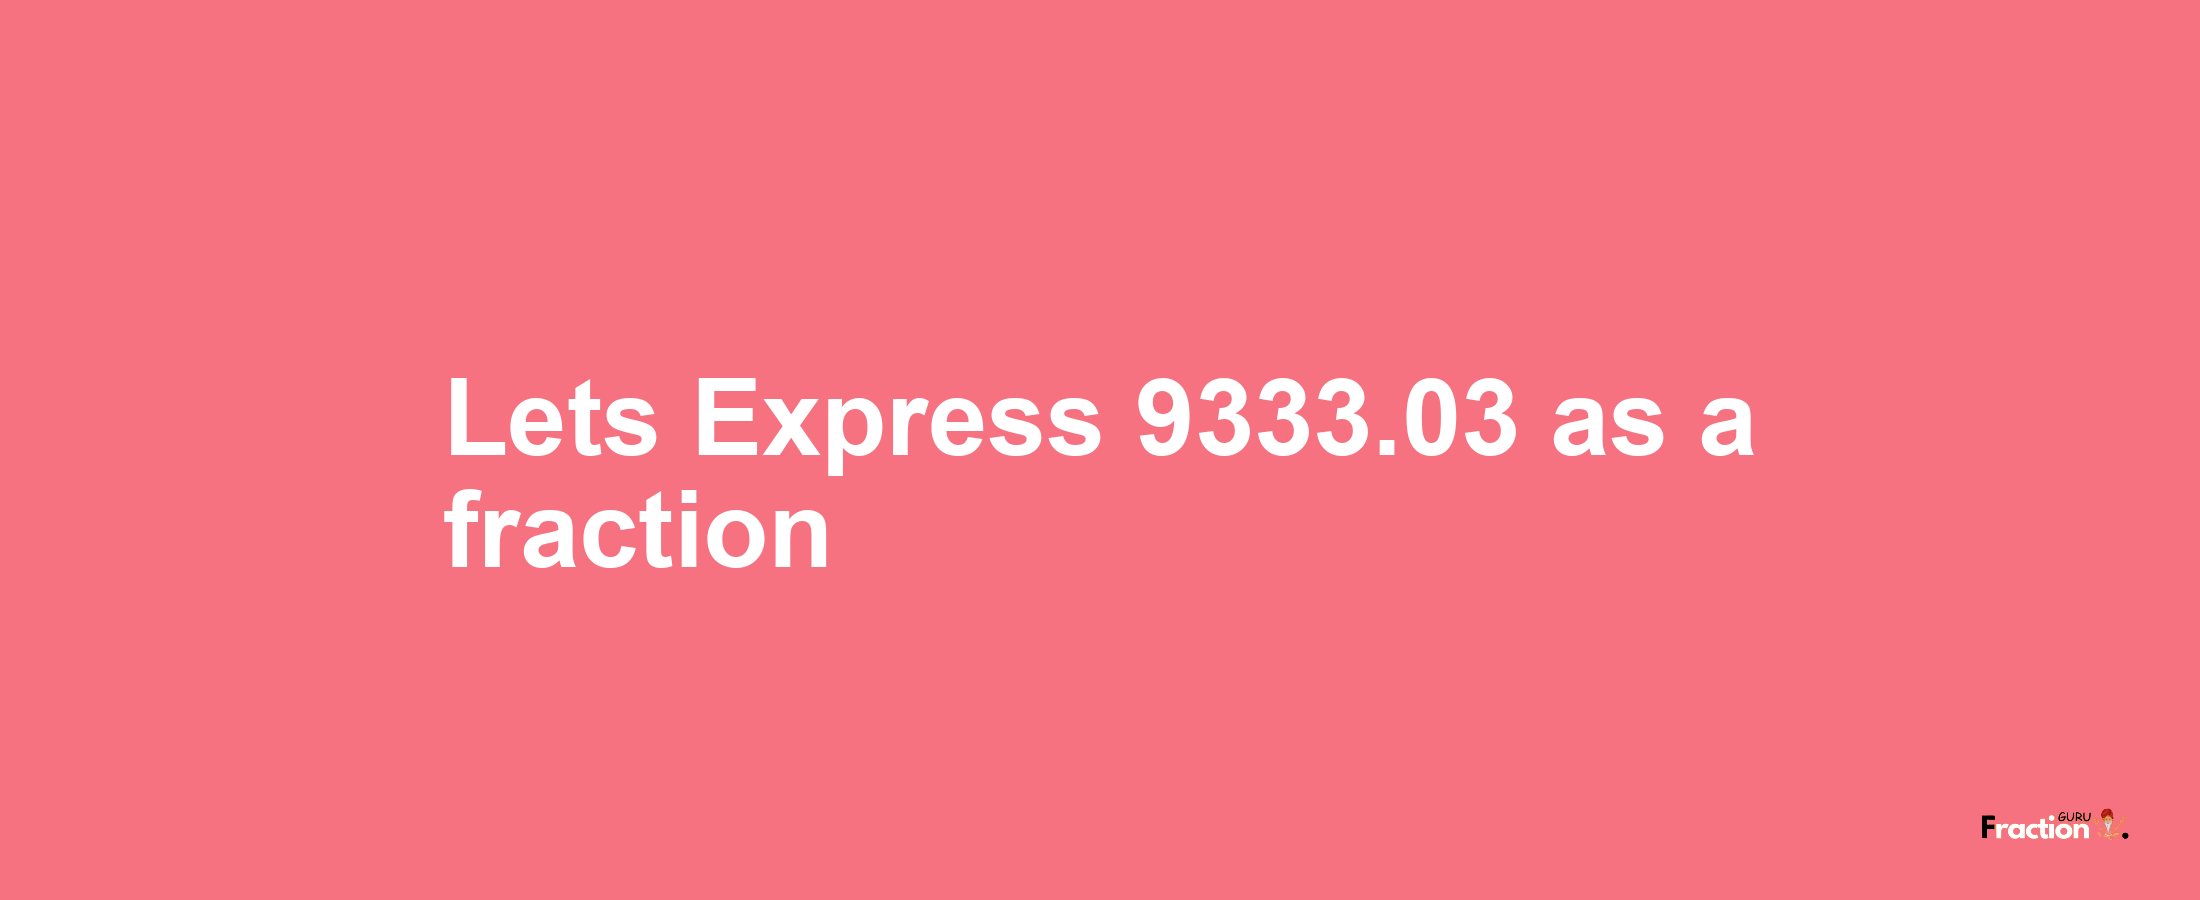 Lets Express 9333.03 as afraction